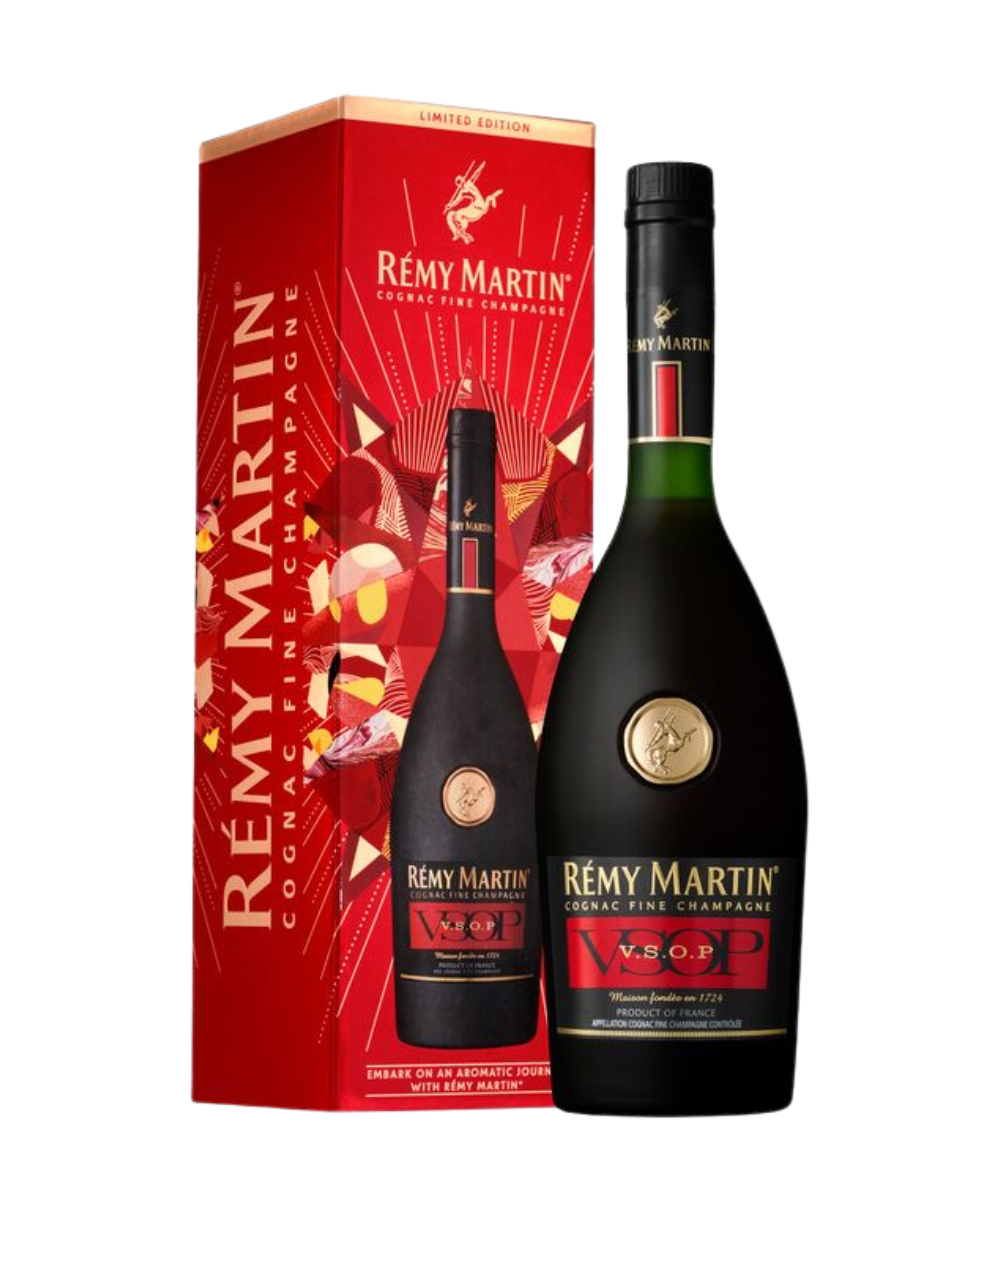 Rémy Martin V.S.O.P. End of Year Limited Edition